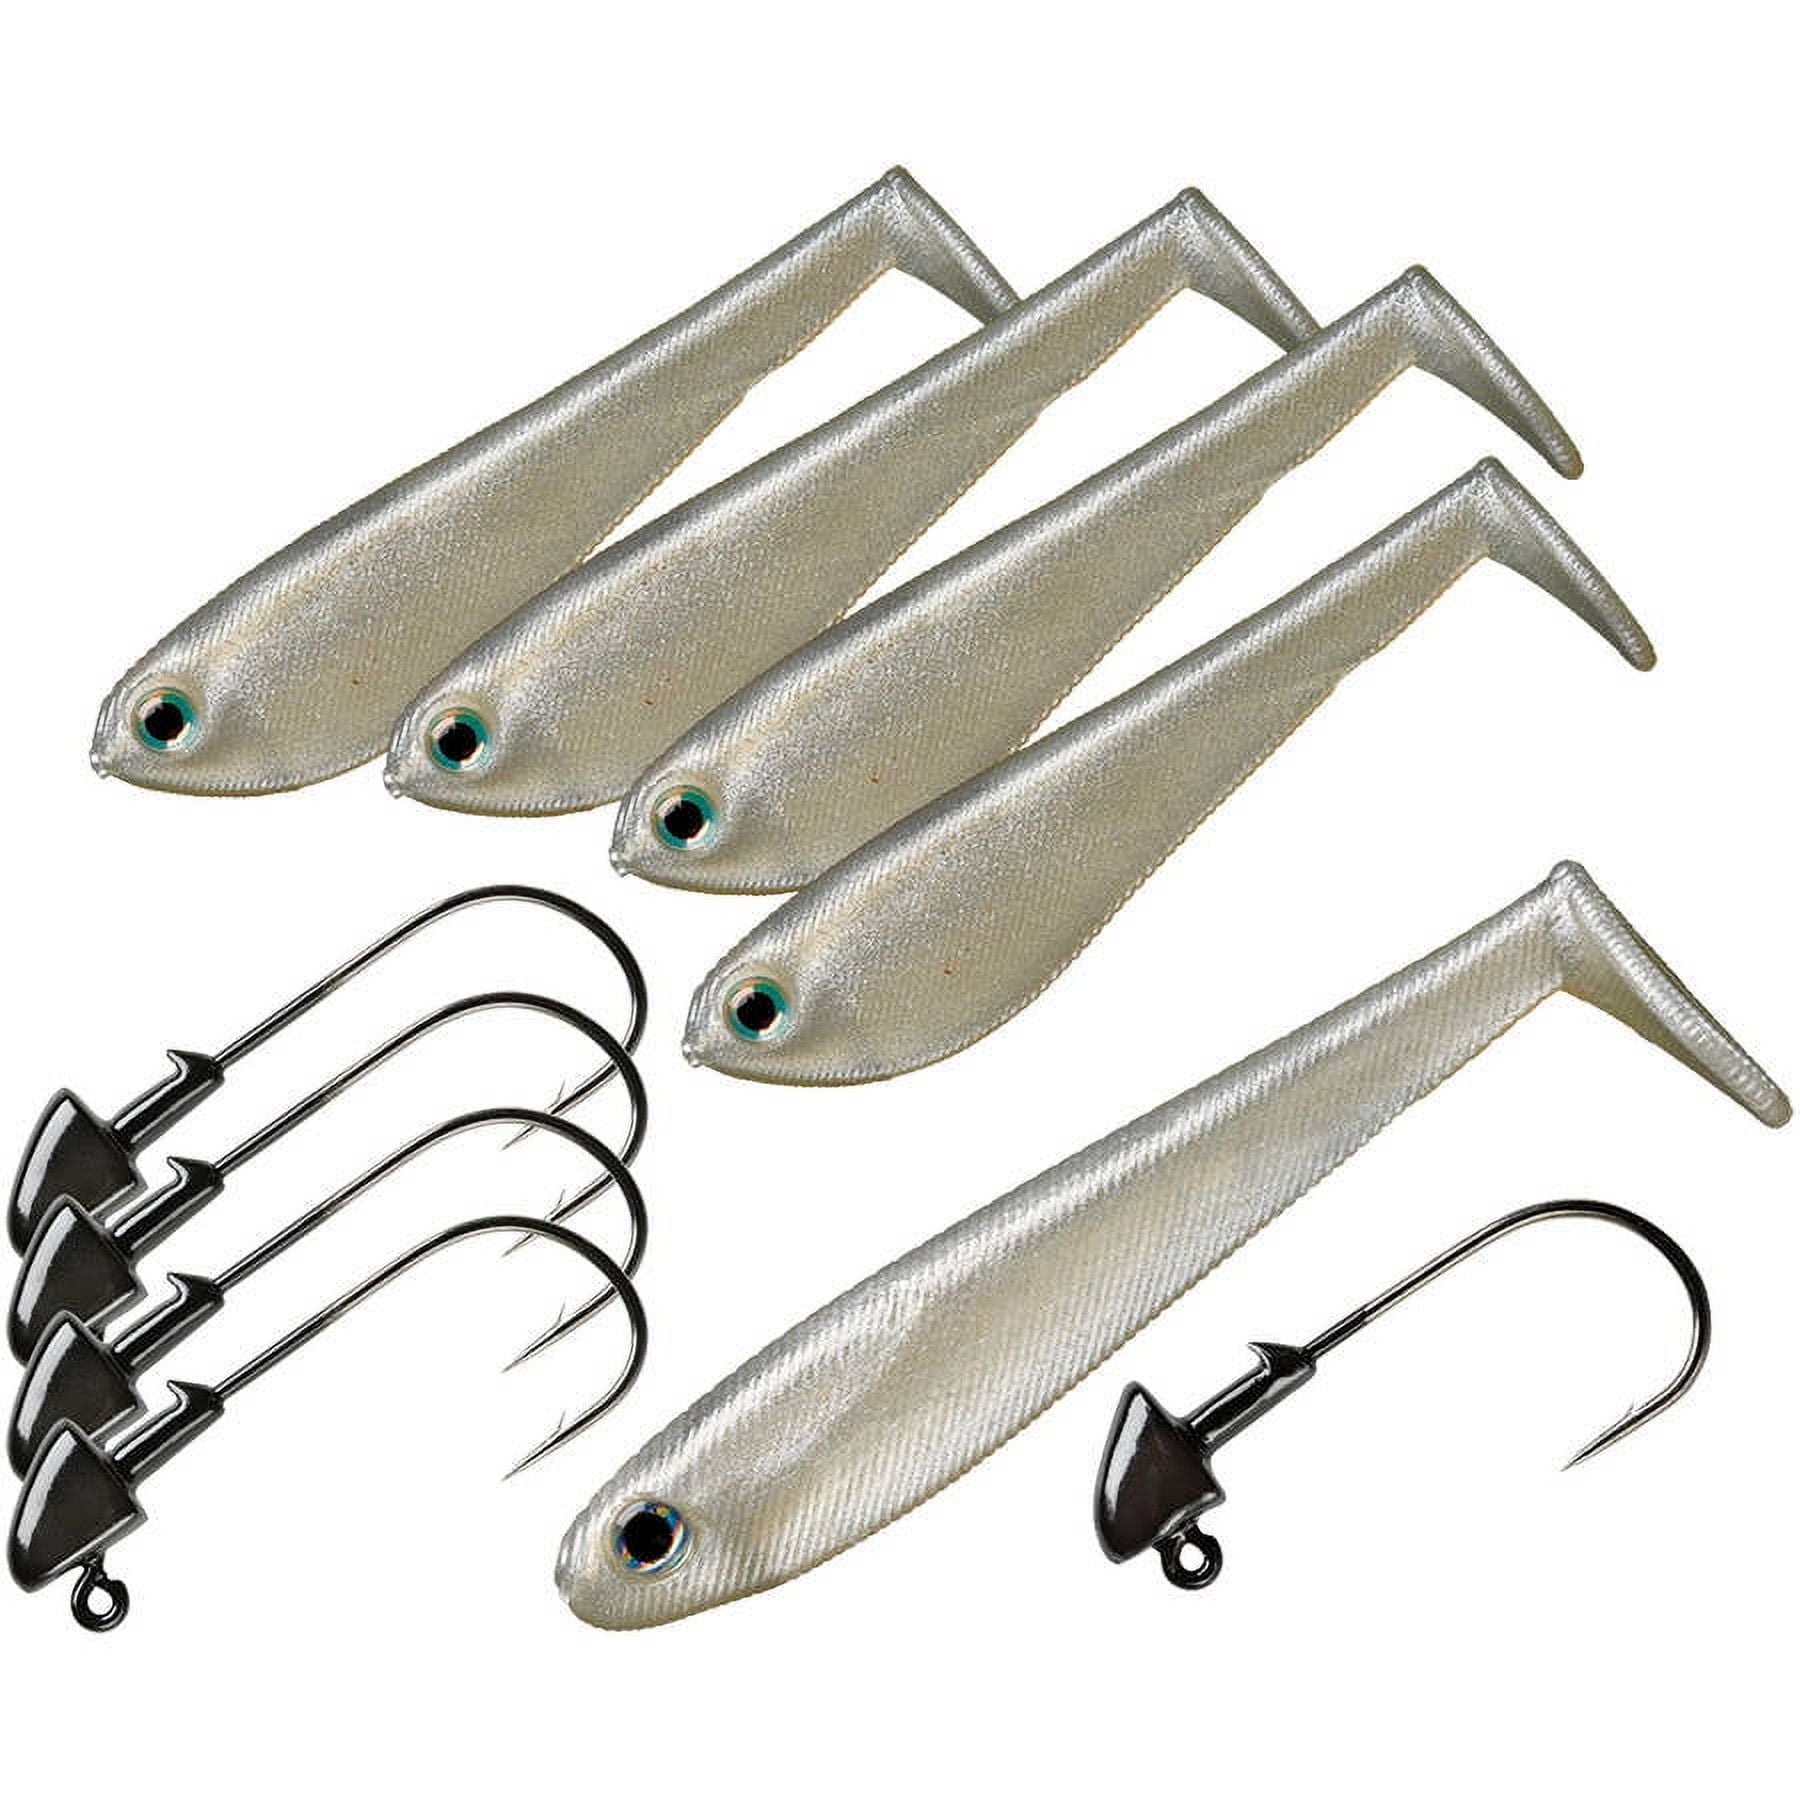  Yum Lures Ned Rig Kit 2, one Size : Sports & Outdoors